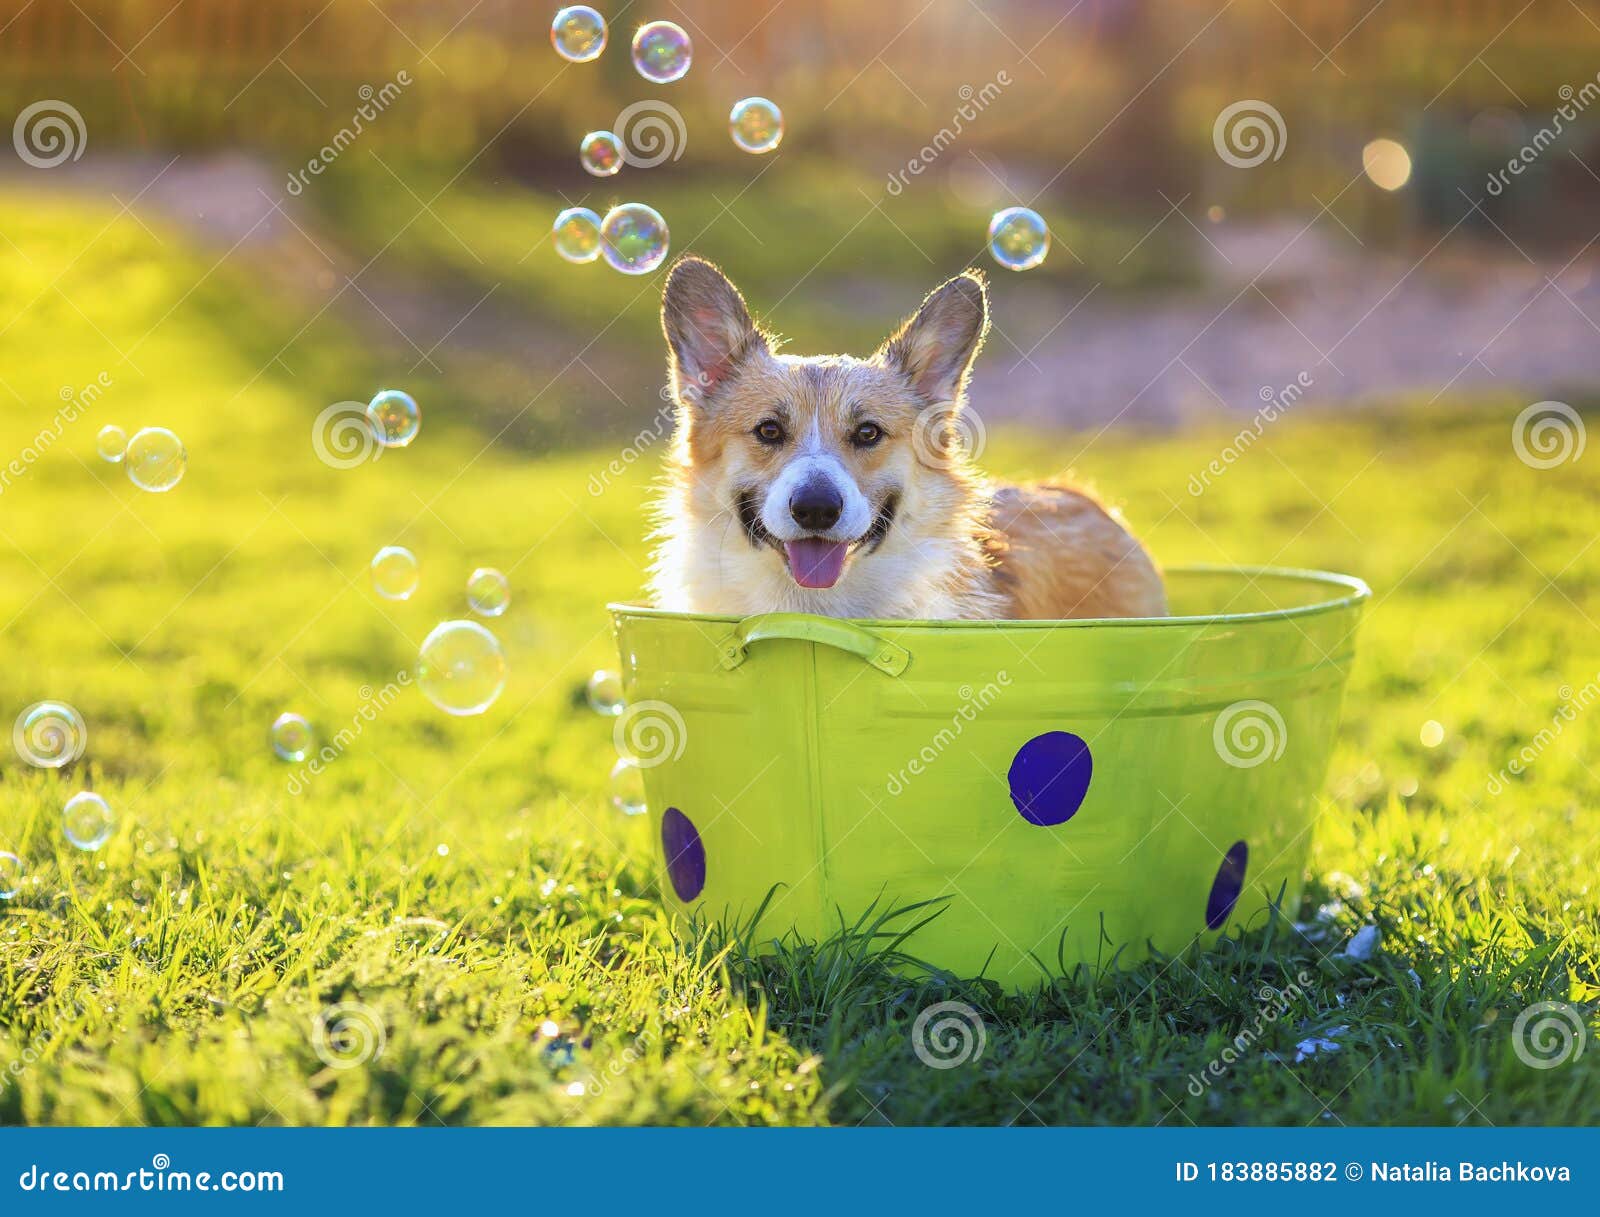 Portrait of a Red Corgi Dog Puppy with Big Wet Ears Sitting in a Basin ...